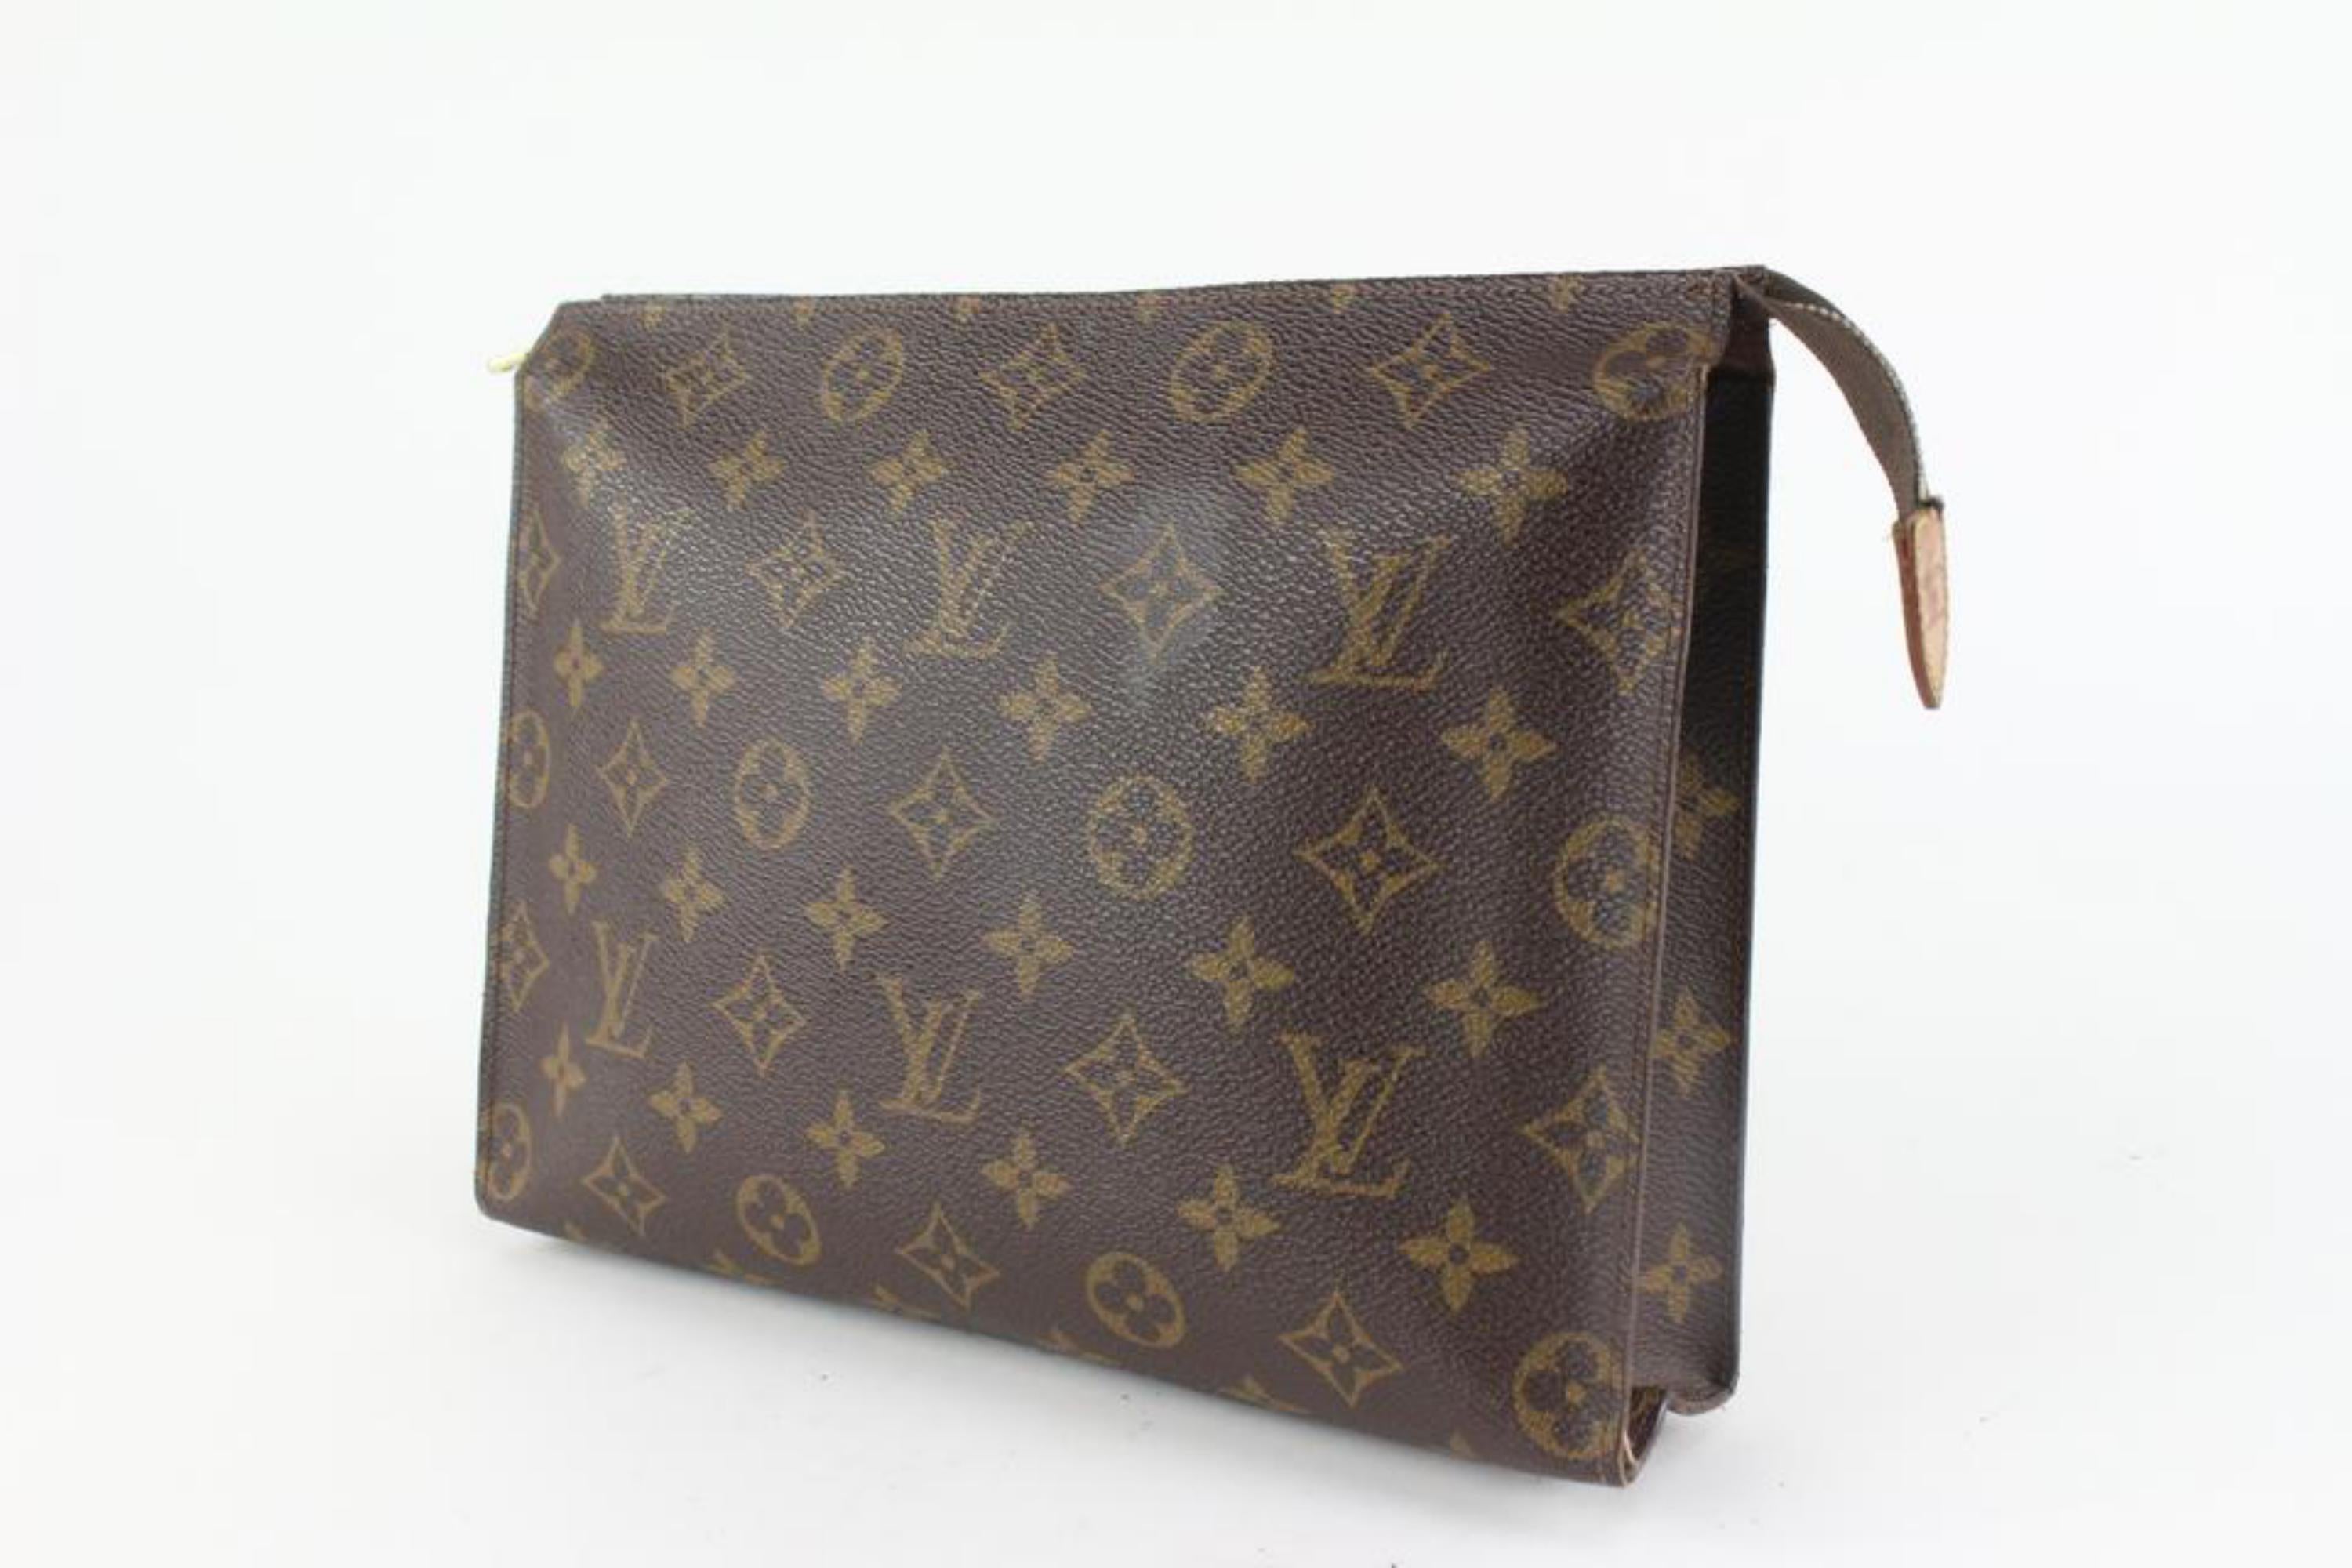 Louis Vuitton Discontinued Monogram Toiletry Pouch 26 Poche Toilette 1220lv40
Date Code/Serial Number: AN0971
Made In: France
Measurements: Length:  9.75